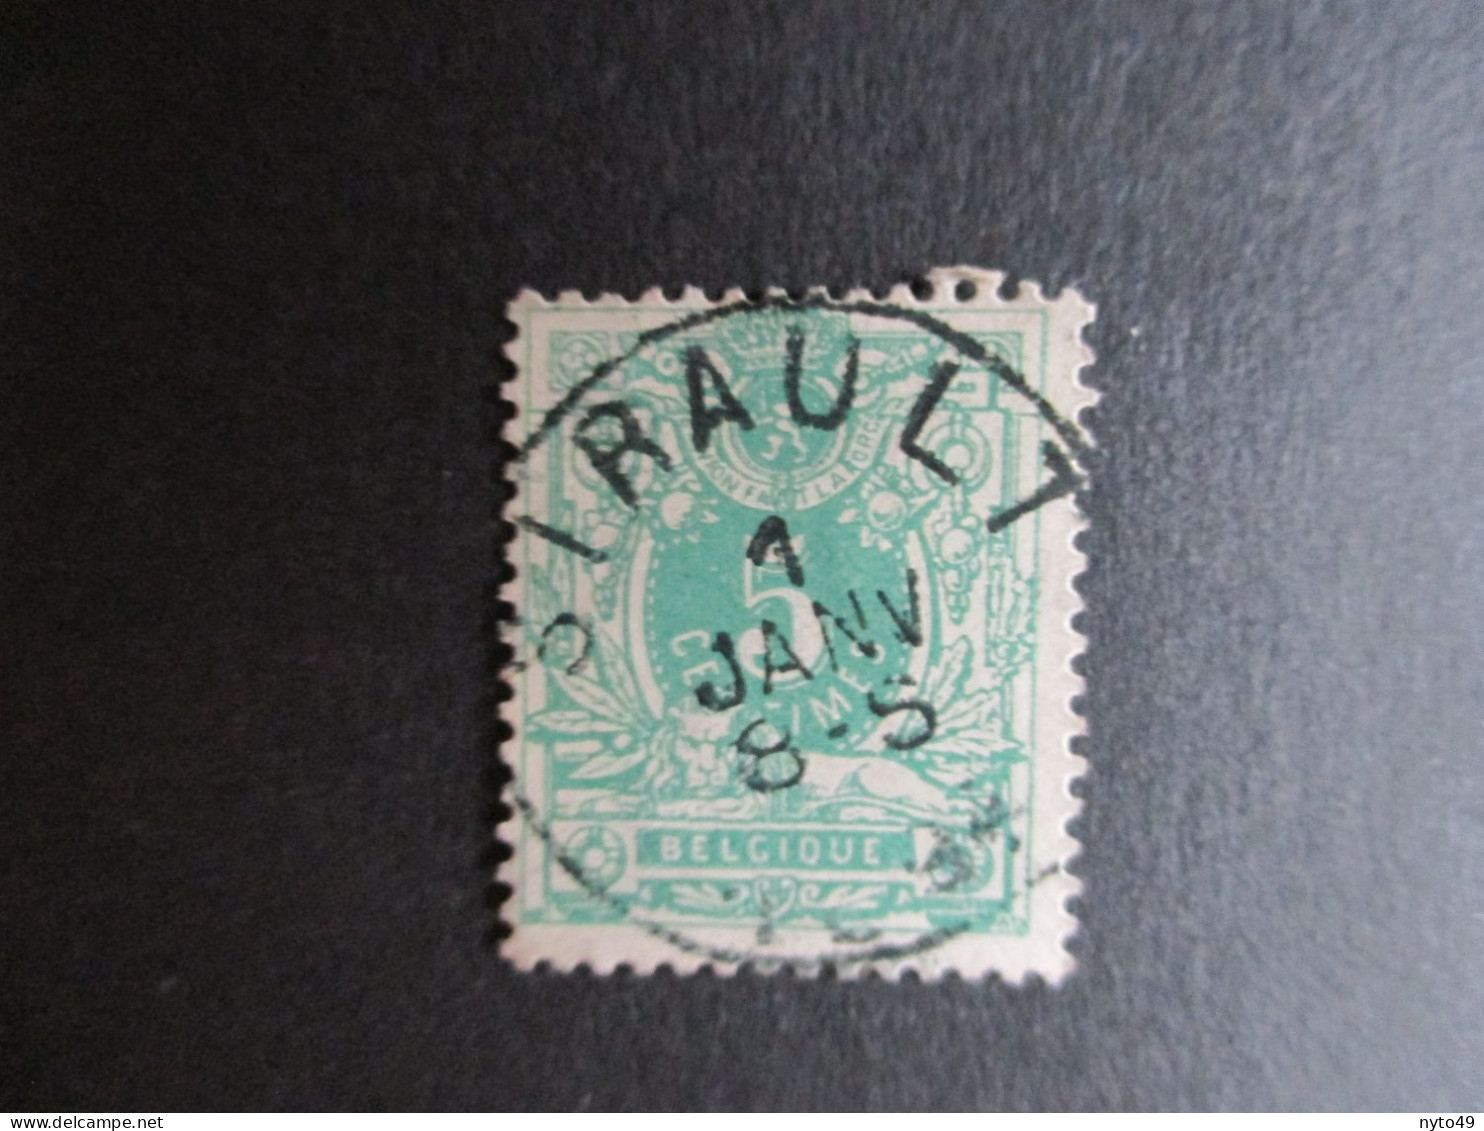 Nr 45 - Centrale Stempel "Sirault" - Coba + 8 - 1869-1888 Lying Lion